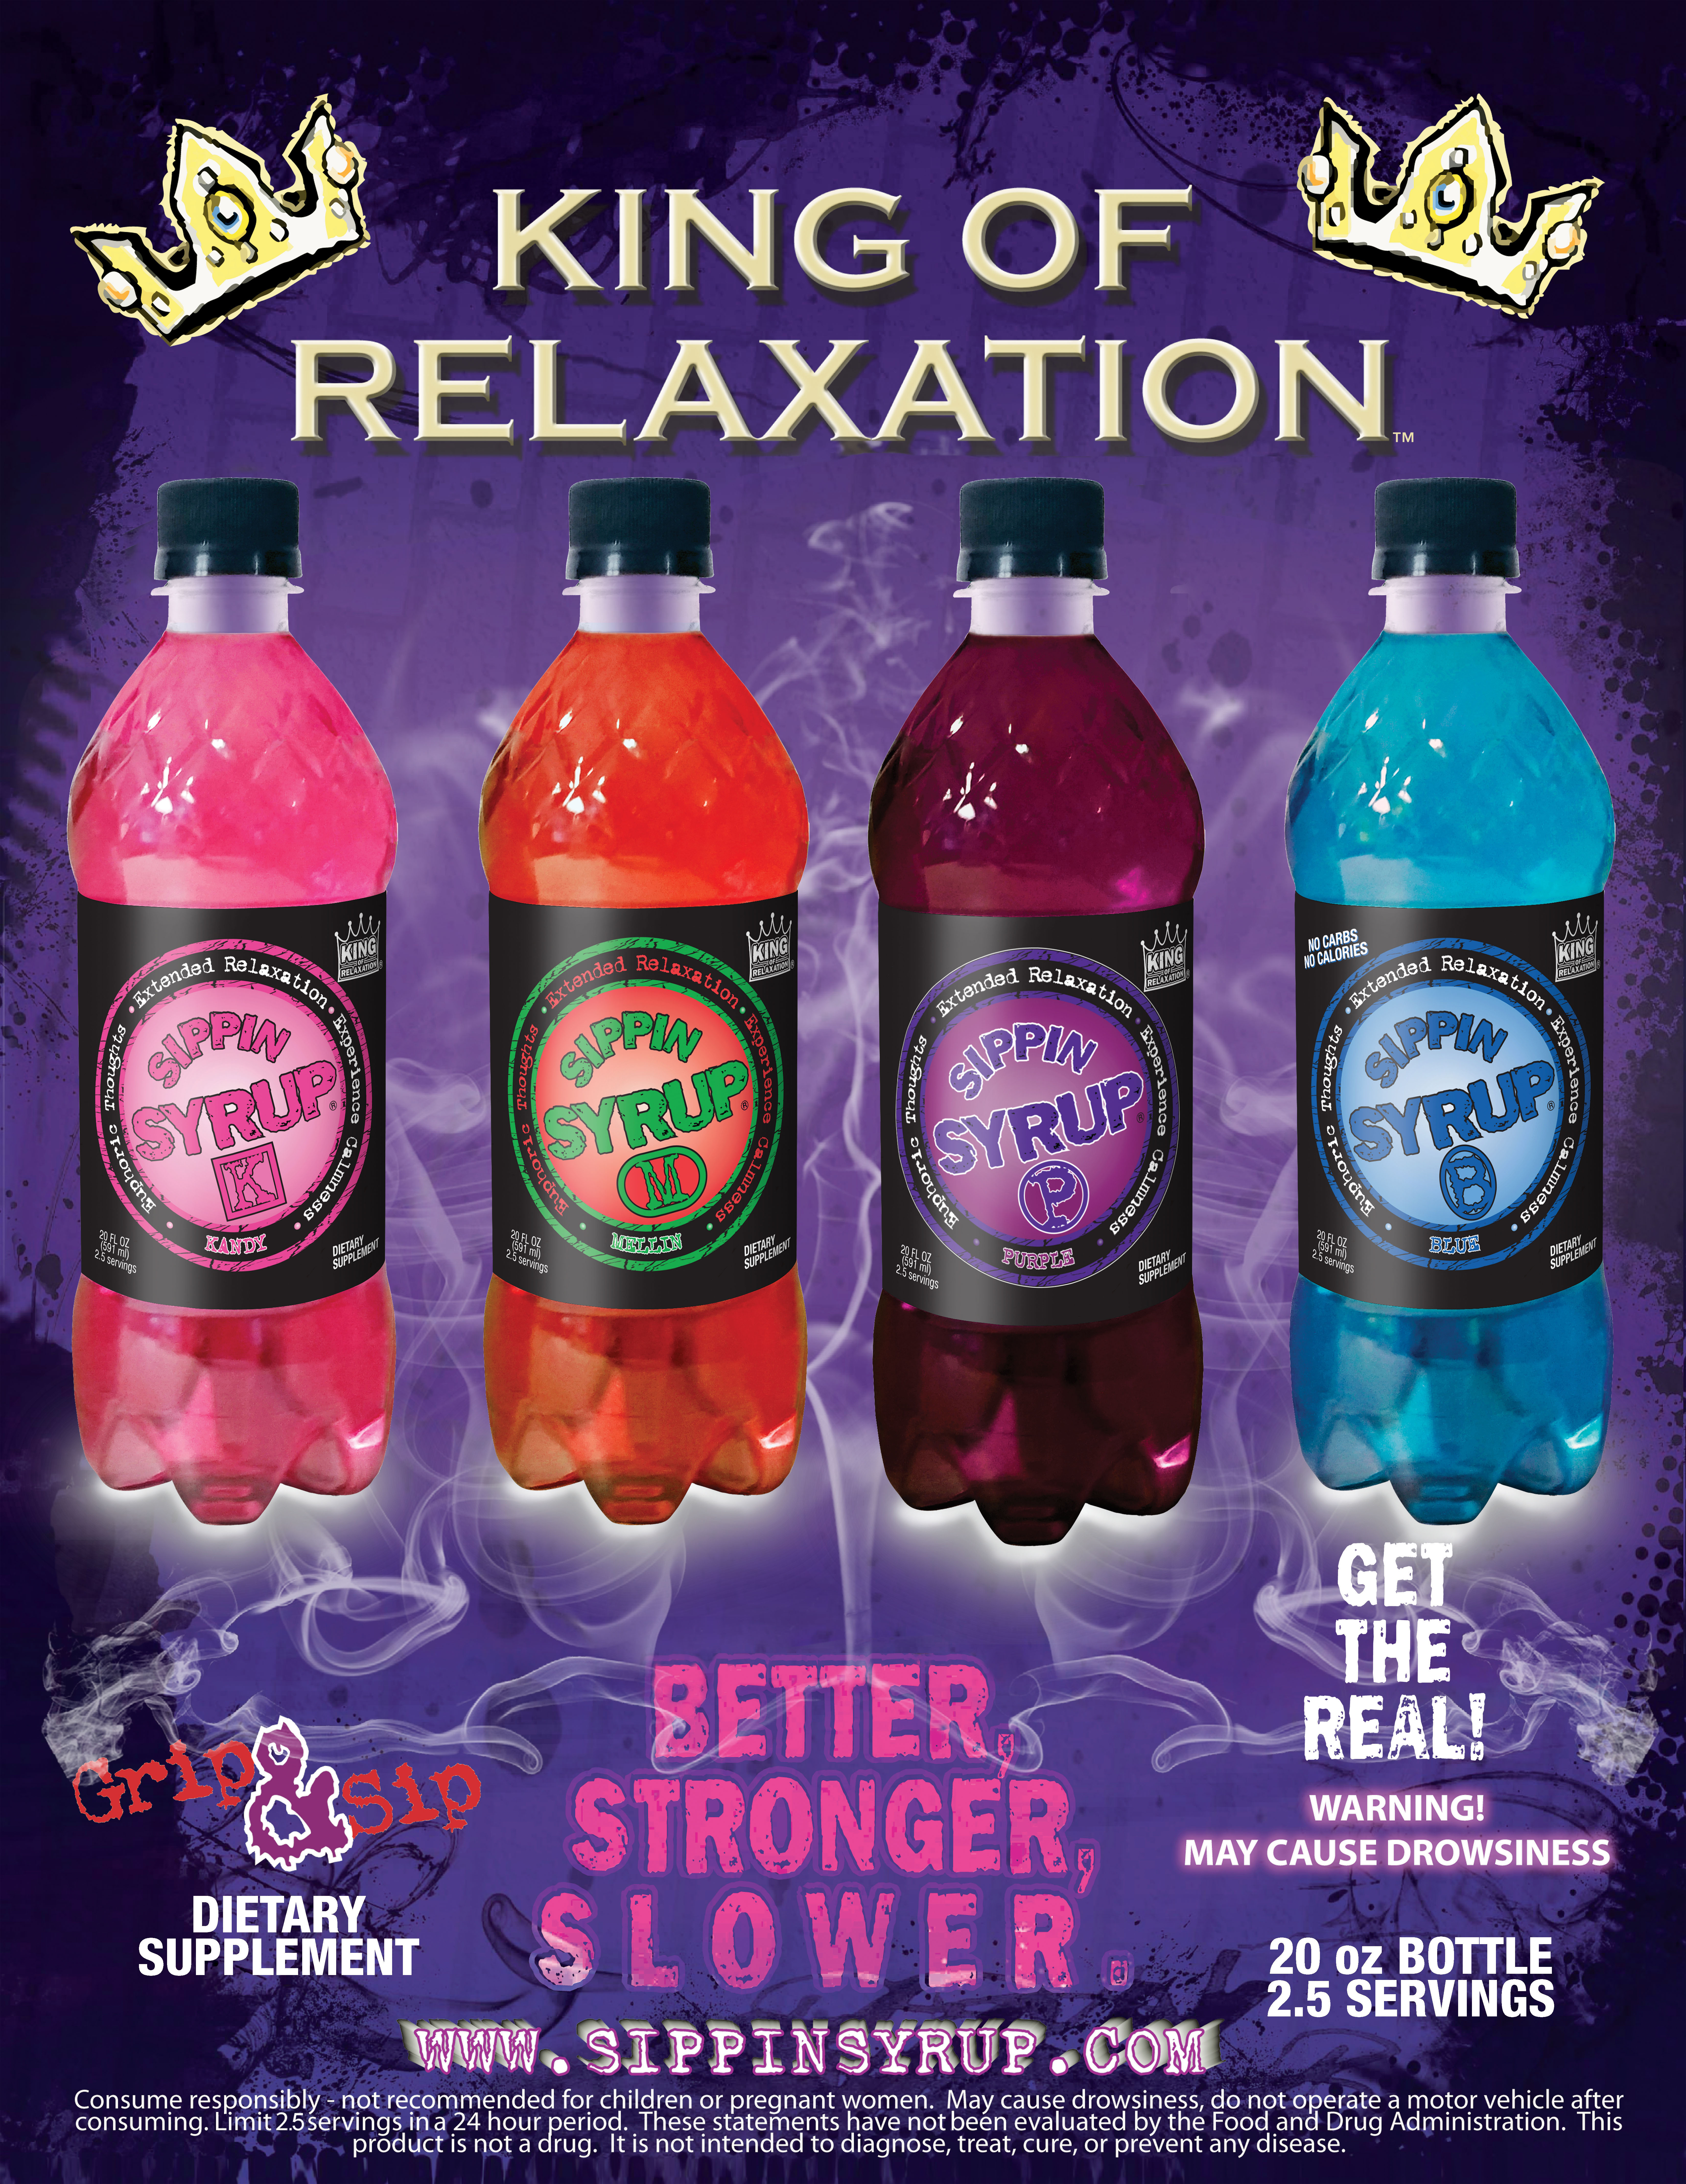 Sippin Syrup decided this year to roll-out nationally four of its most popular flavors: 1) Sippin Syrup Purple, a sweet smooth grape flavor 2) Sippin Syrup Blue, a refreshing pomegranate-berry taste with no carbs, calories, or sugar 3) Sippin Syrup Kandy, a vanilla cotton candy flavor straight from the carnival 4) Sippin Syrup Mellin, a sweet watermelon/strawberry flavor. You can Sippin Syrup on Amazon.